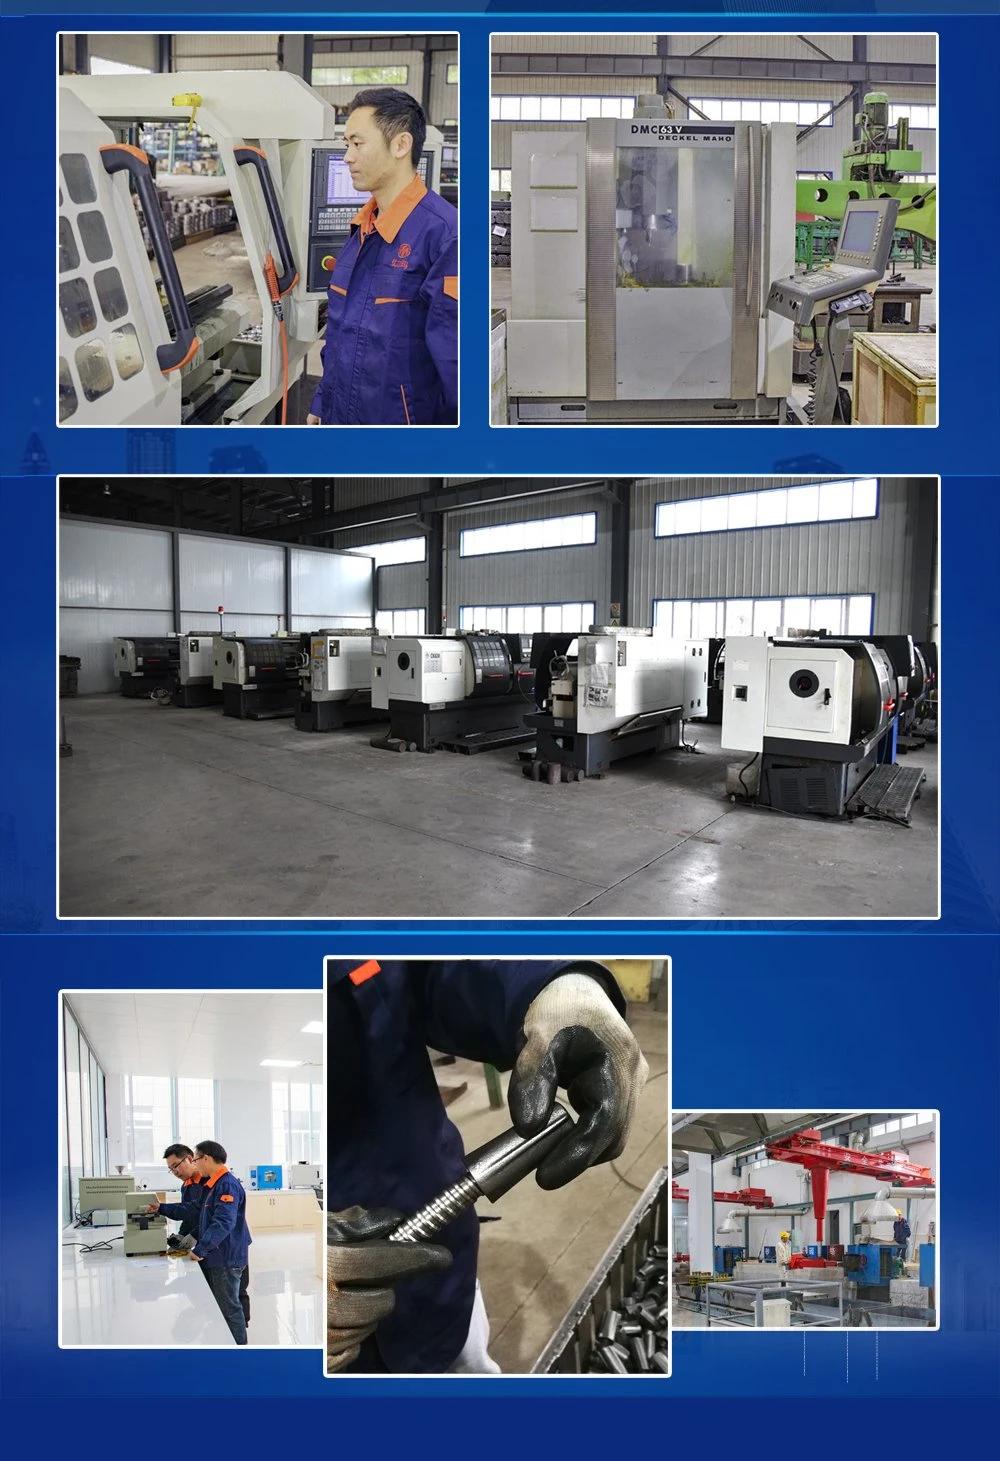 Machining,Accessories,Decoration,Lighting,Pumping,Warehouse,Basement,Mining,Oil,Train,Truck,Bus,Auto Part,Agriculture,Hanging Board,Electricity,Wire System,Pow